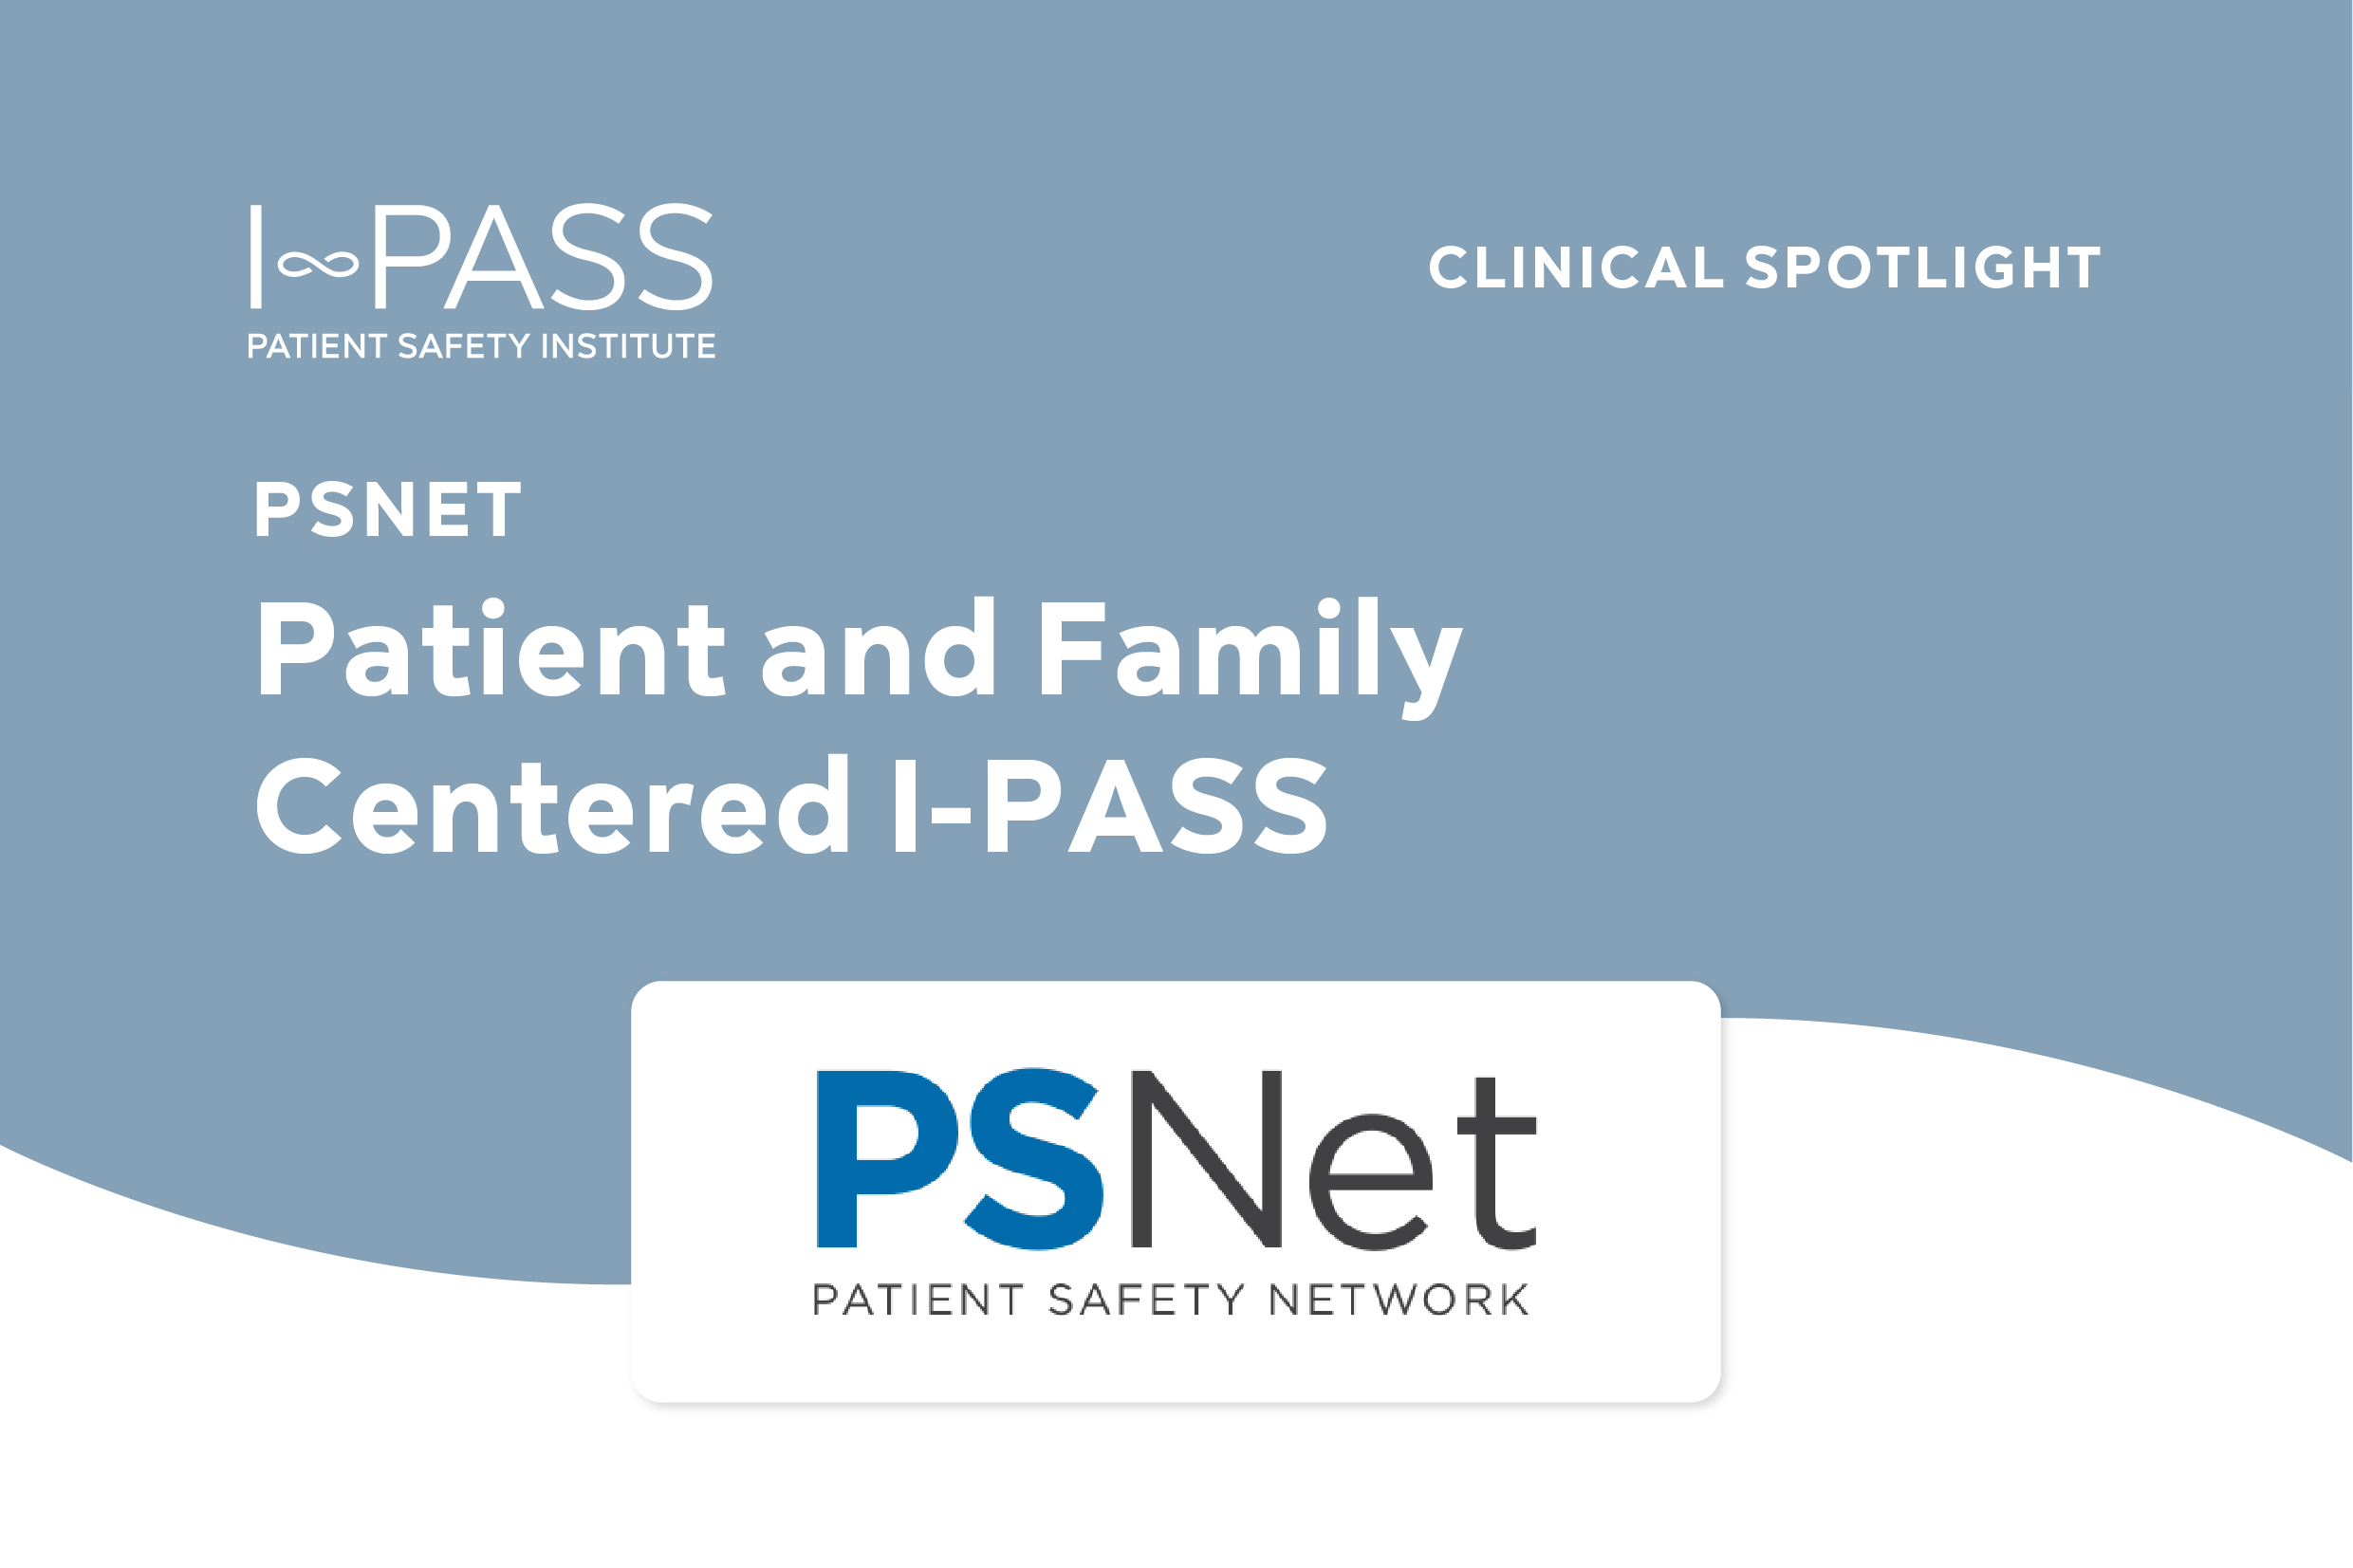 Patient Safety Network: Patient and Family Centered I-PASS